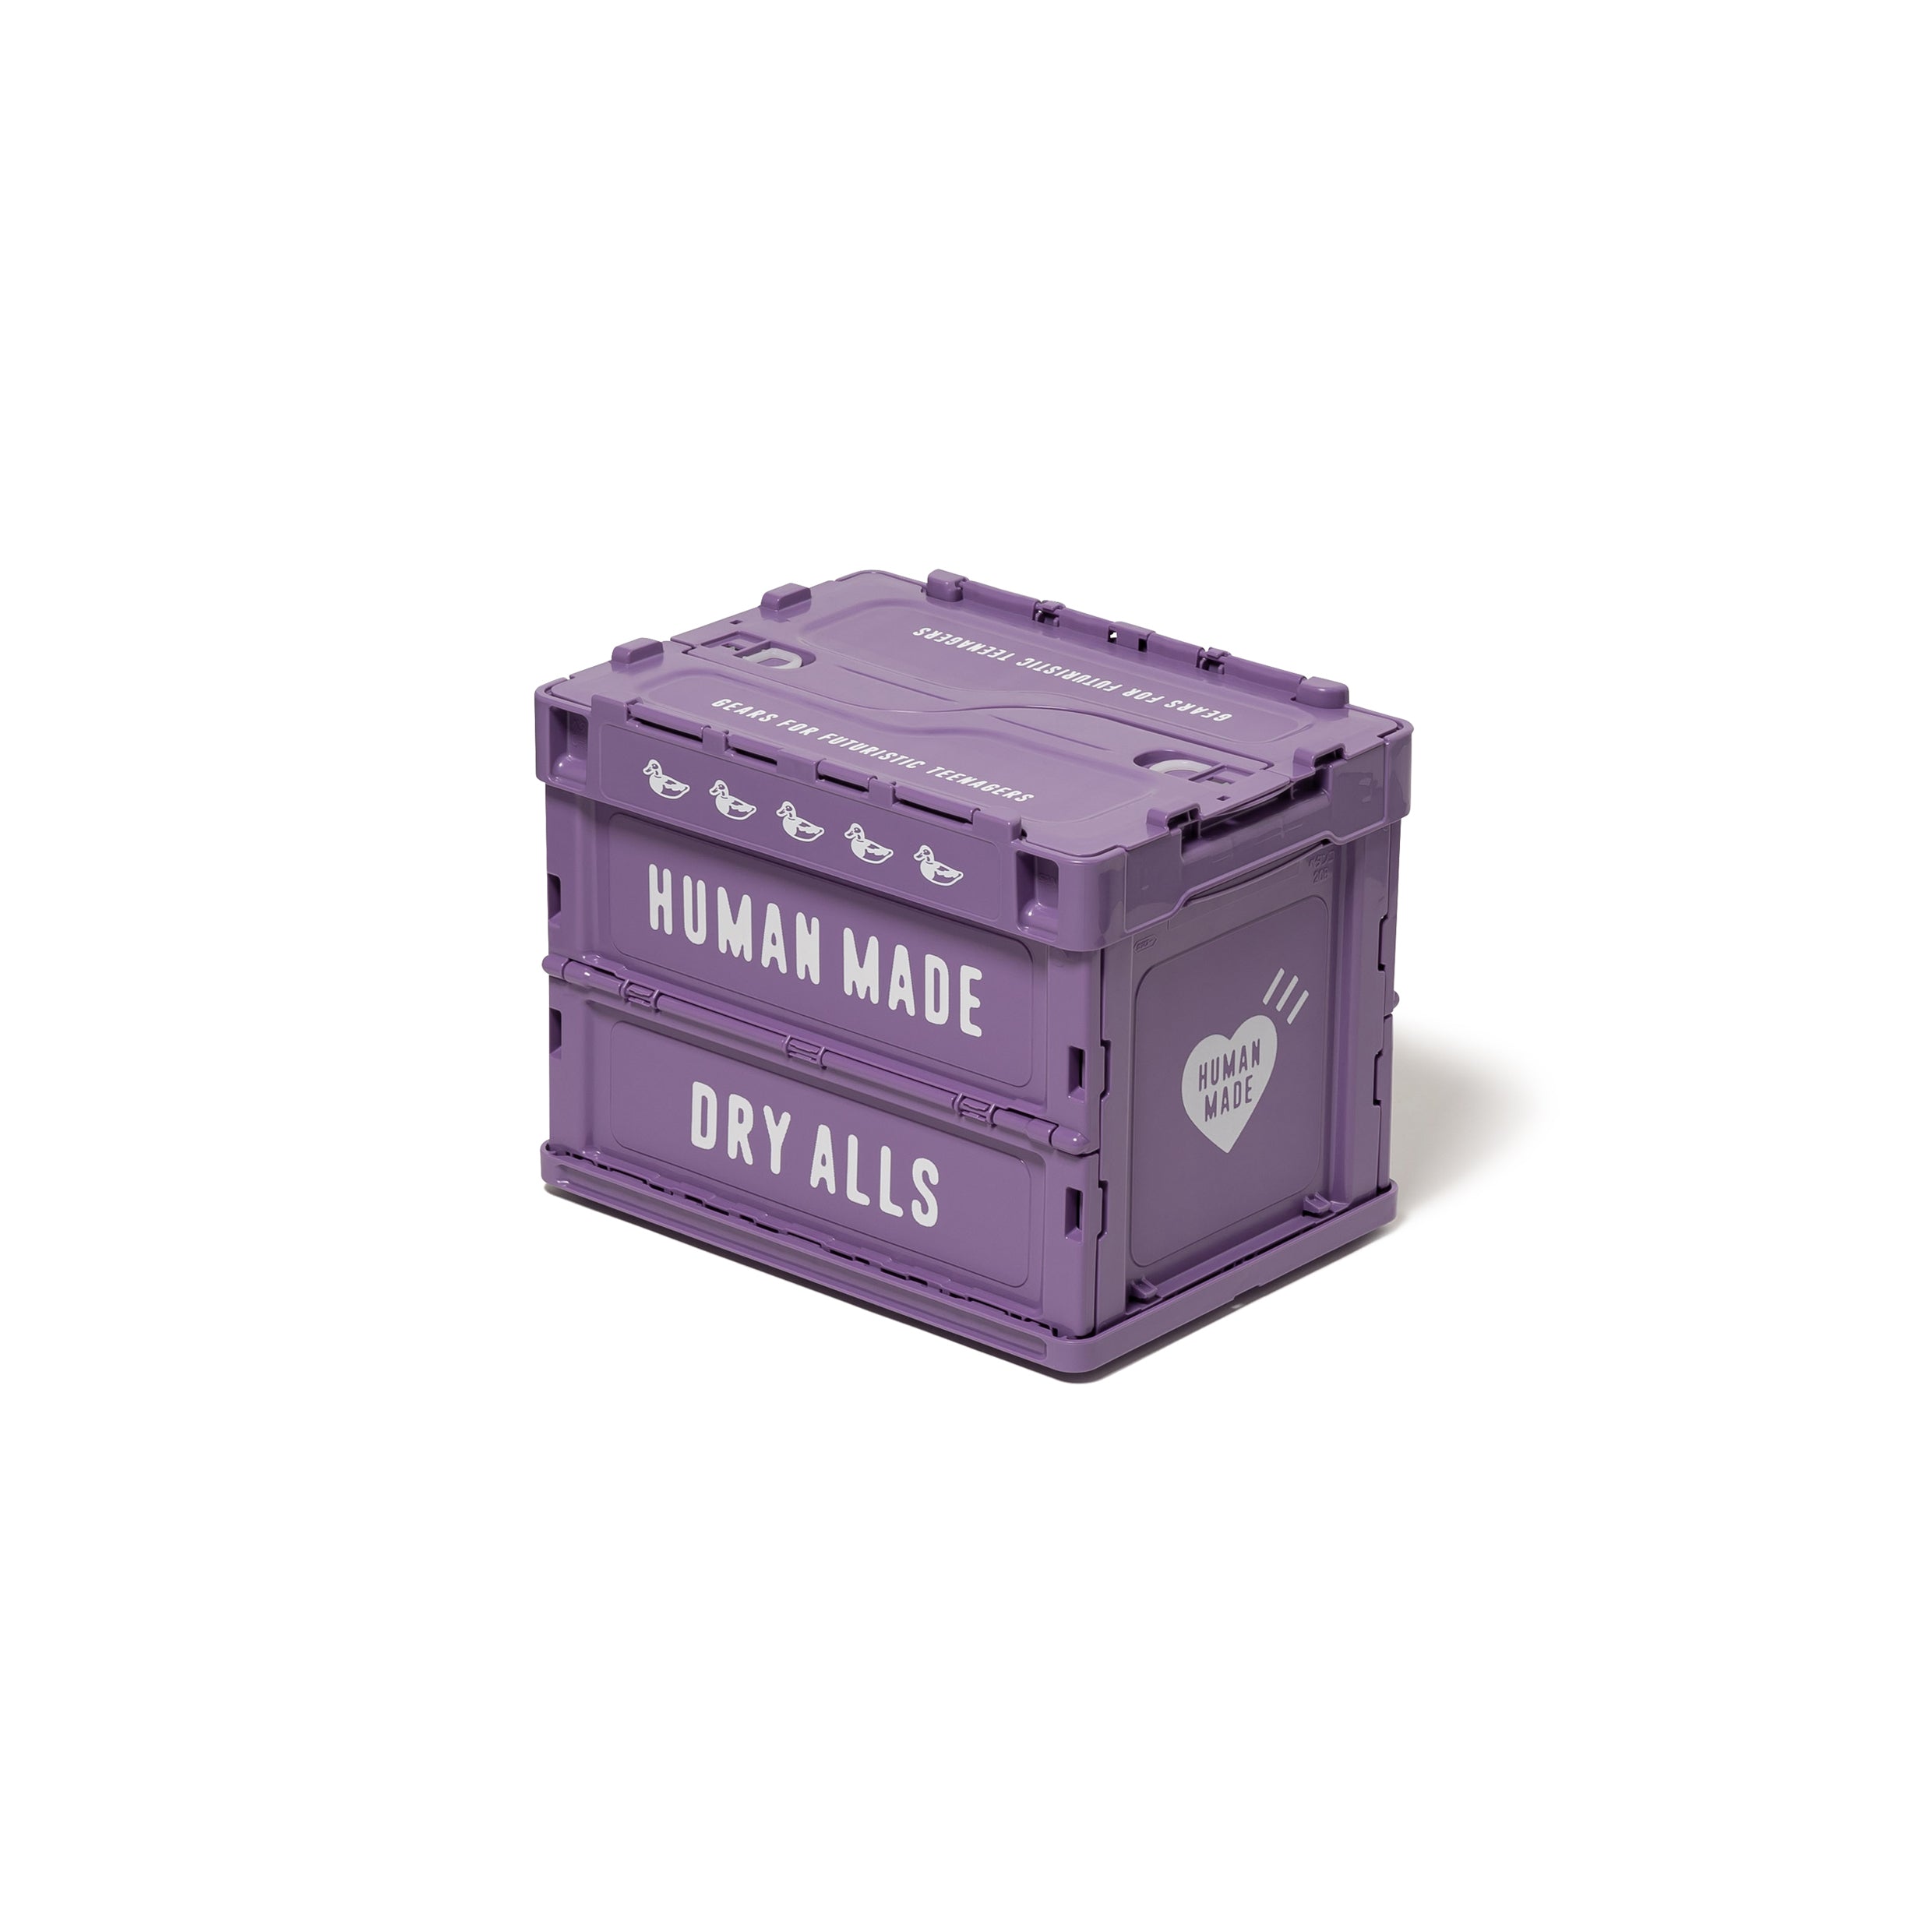 HUMAN MADE CONTAINER 20L – HUMAN MADE ONLINE STORE